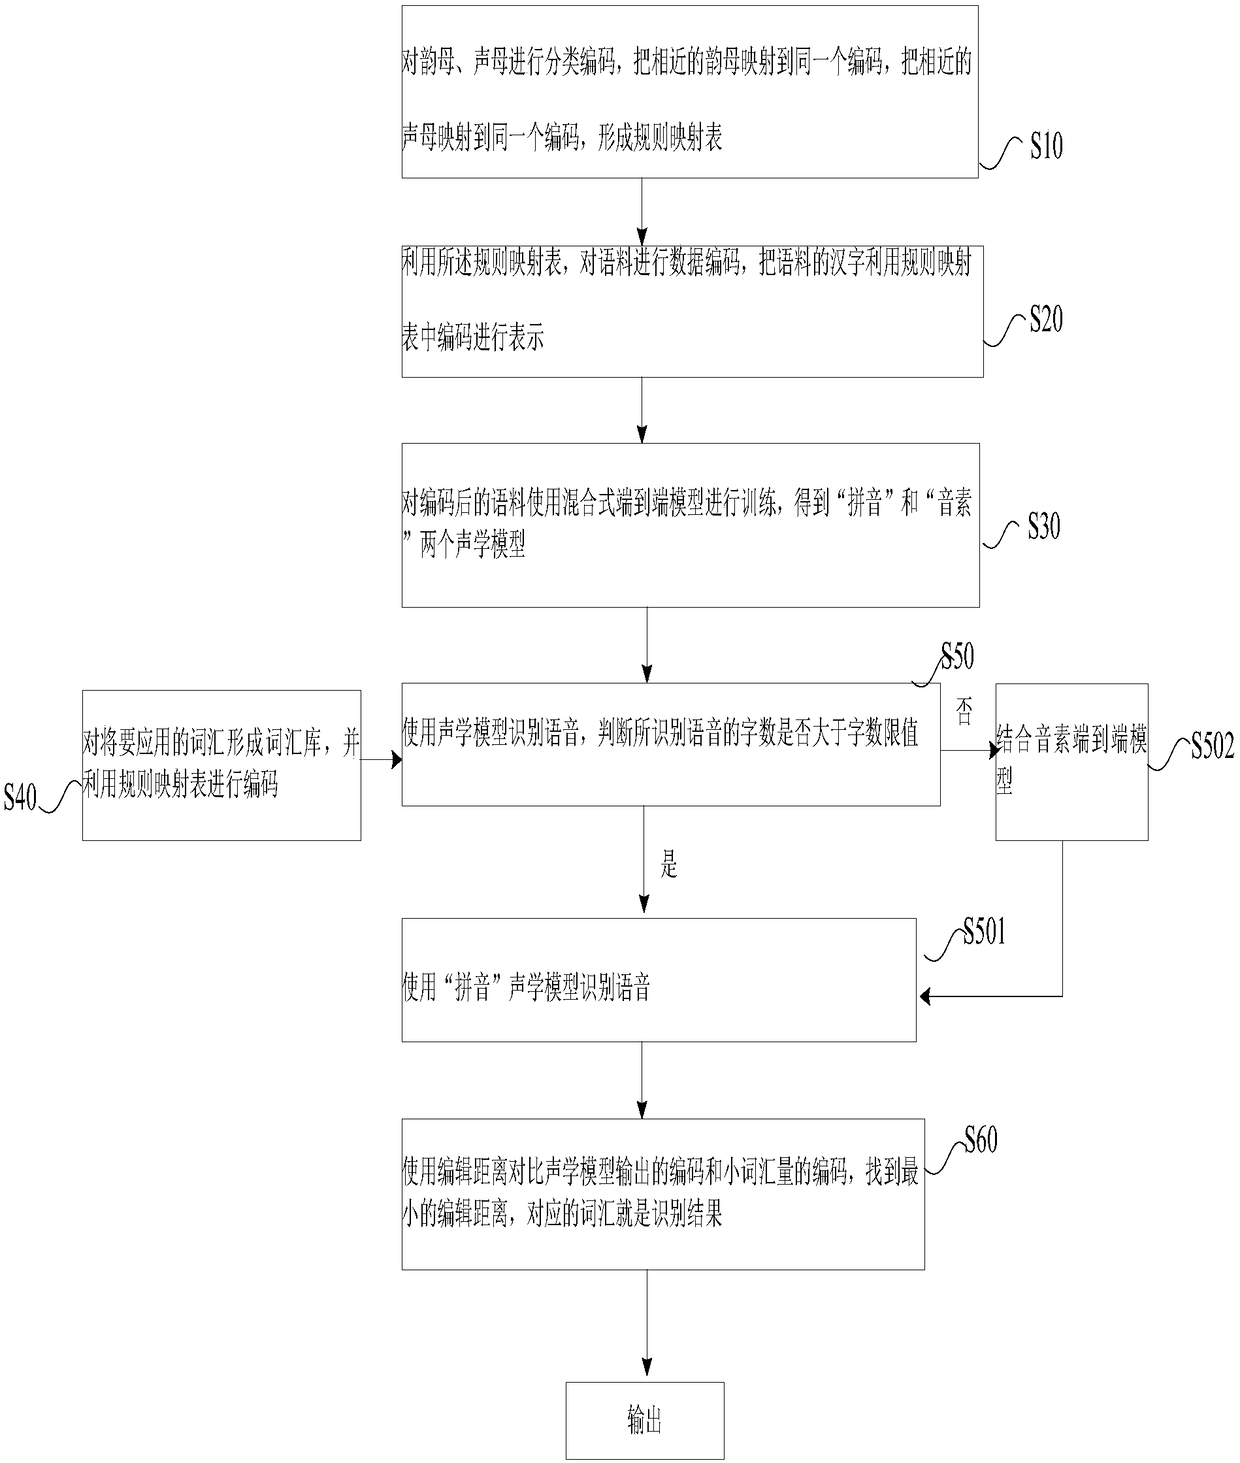 Speech recognition method and system based on end-to-end deep learning model